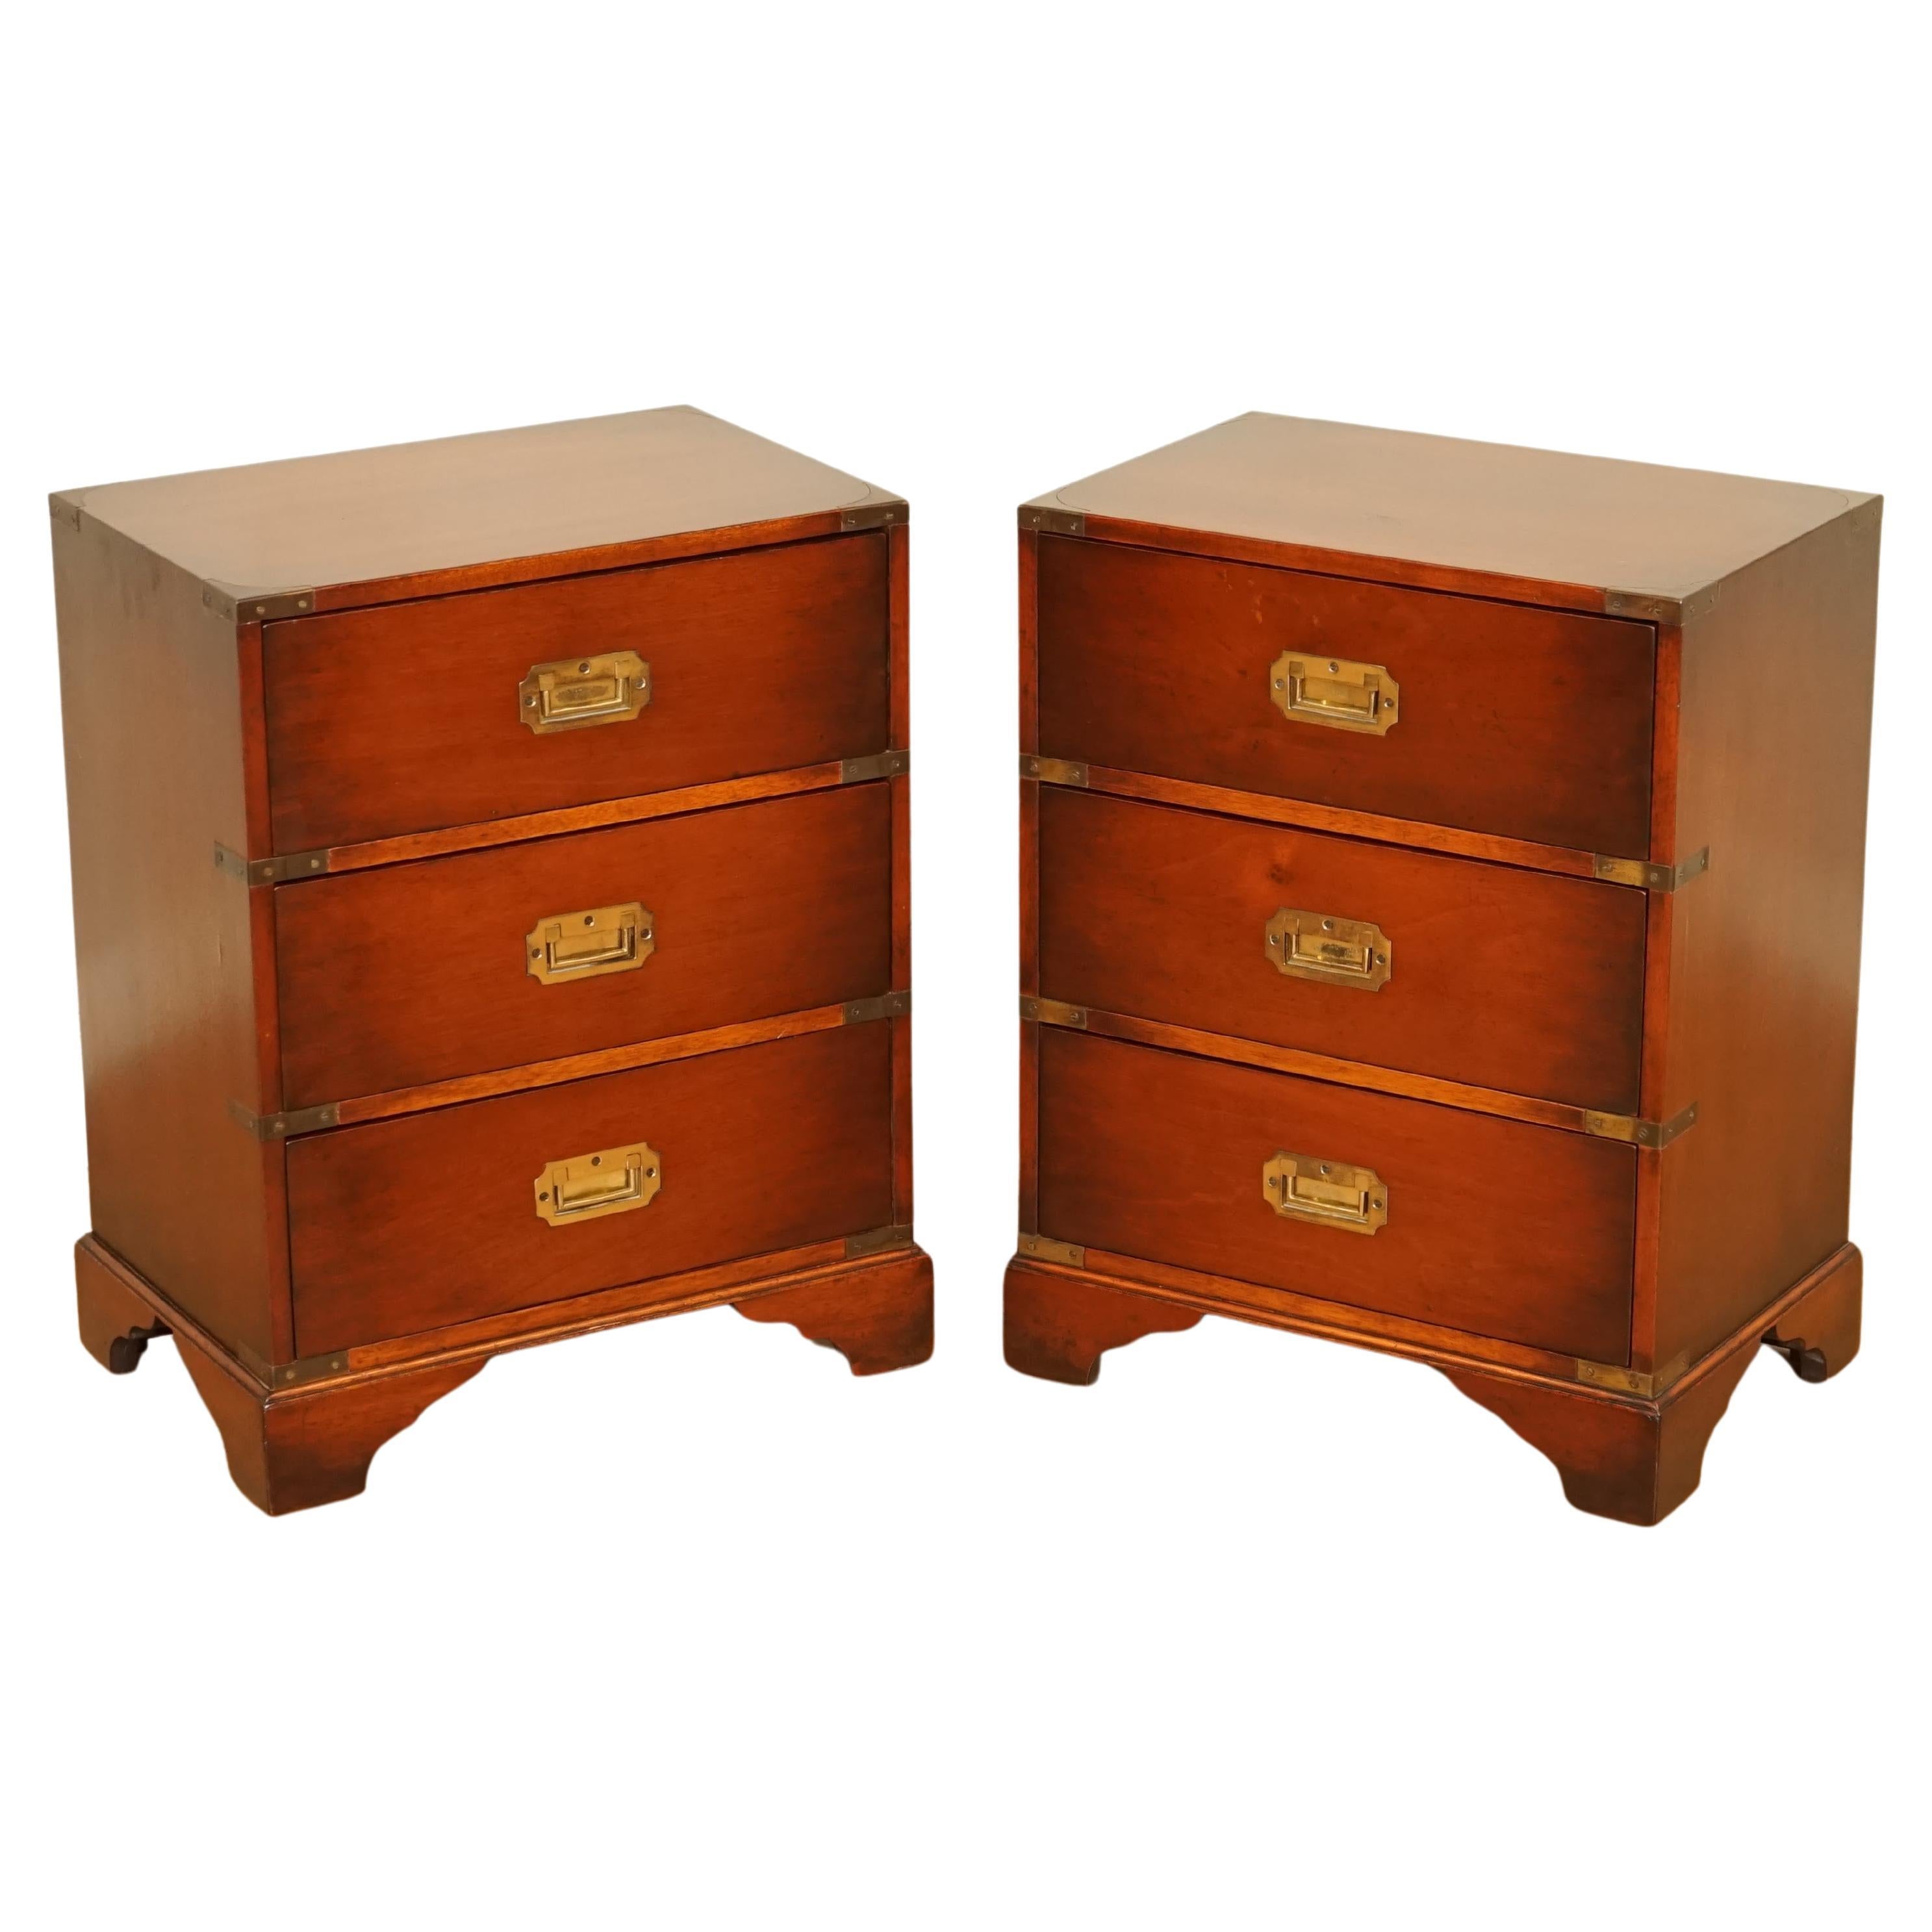 Stunning Pair of Vintage Military Campaign Bedside End Tables